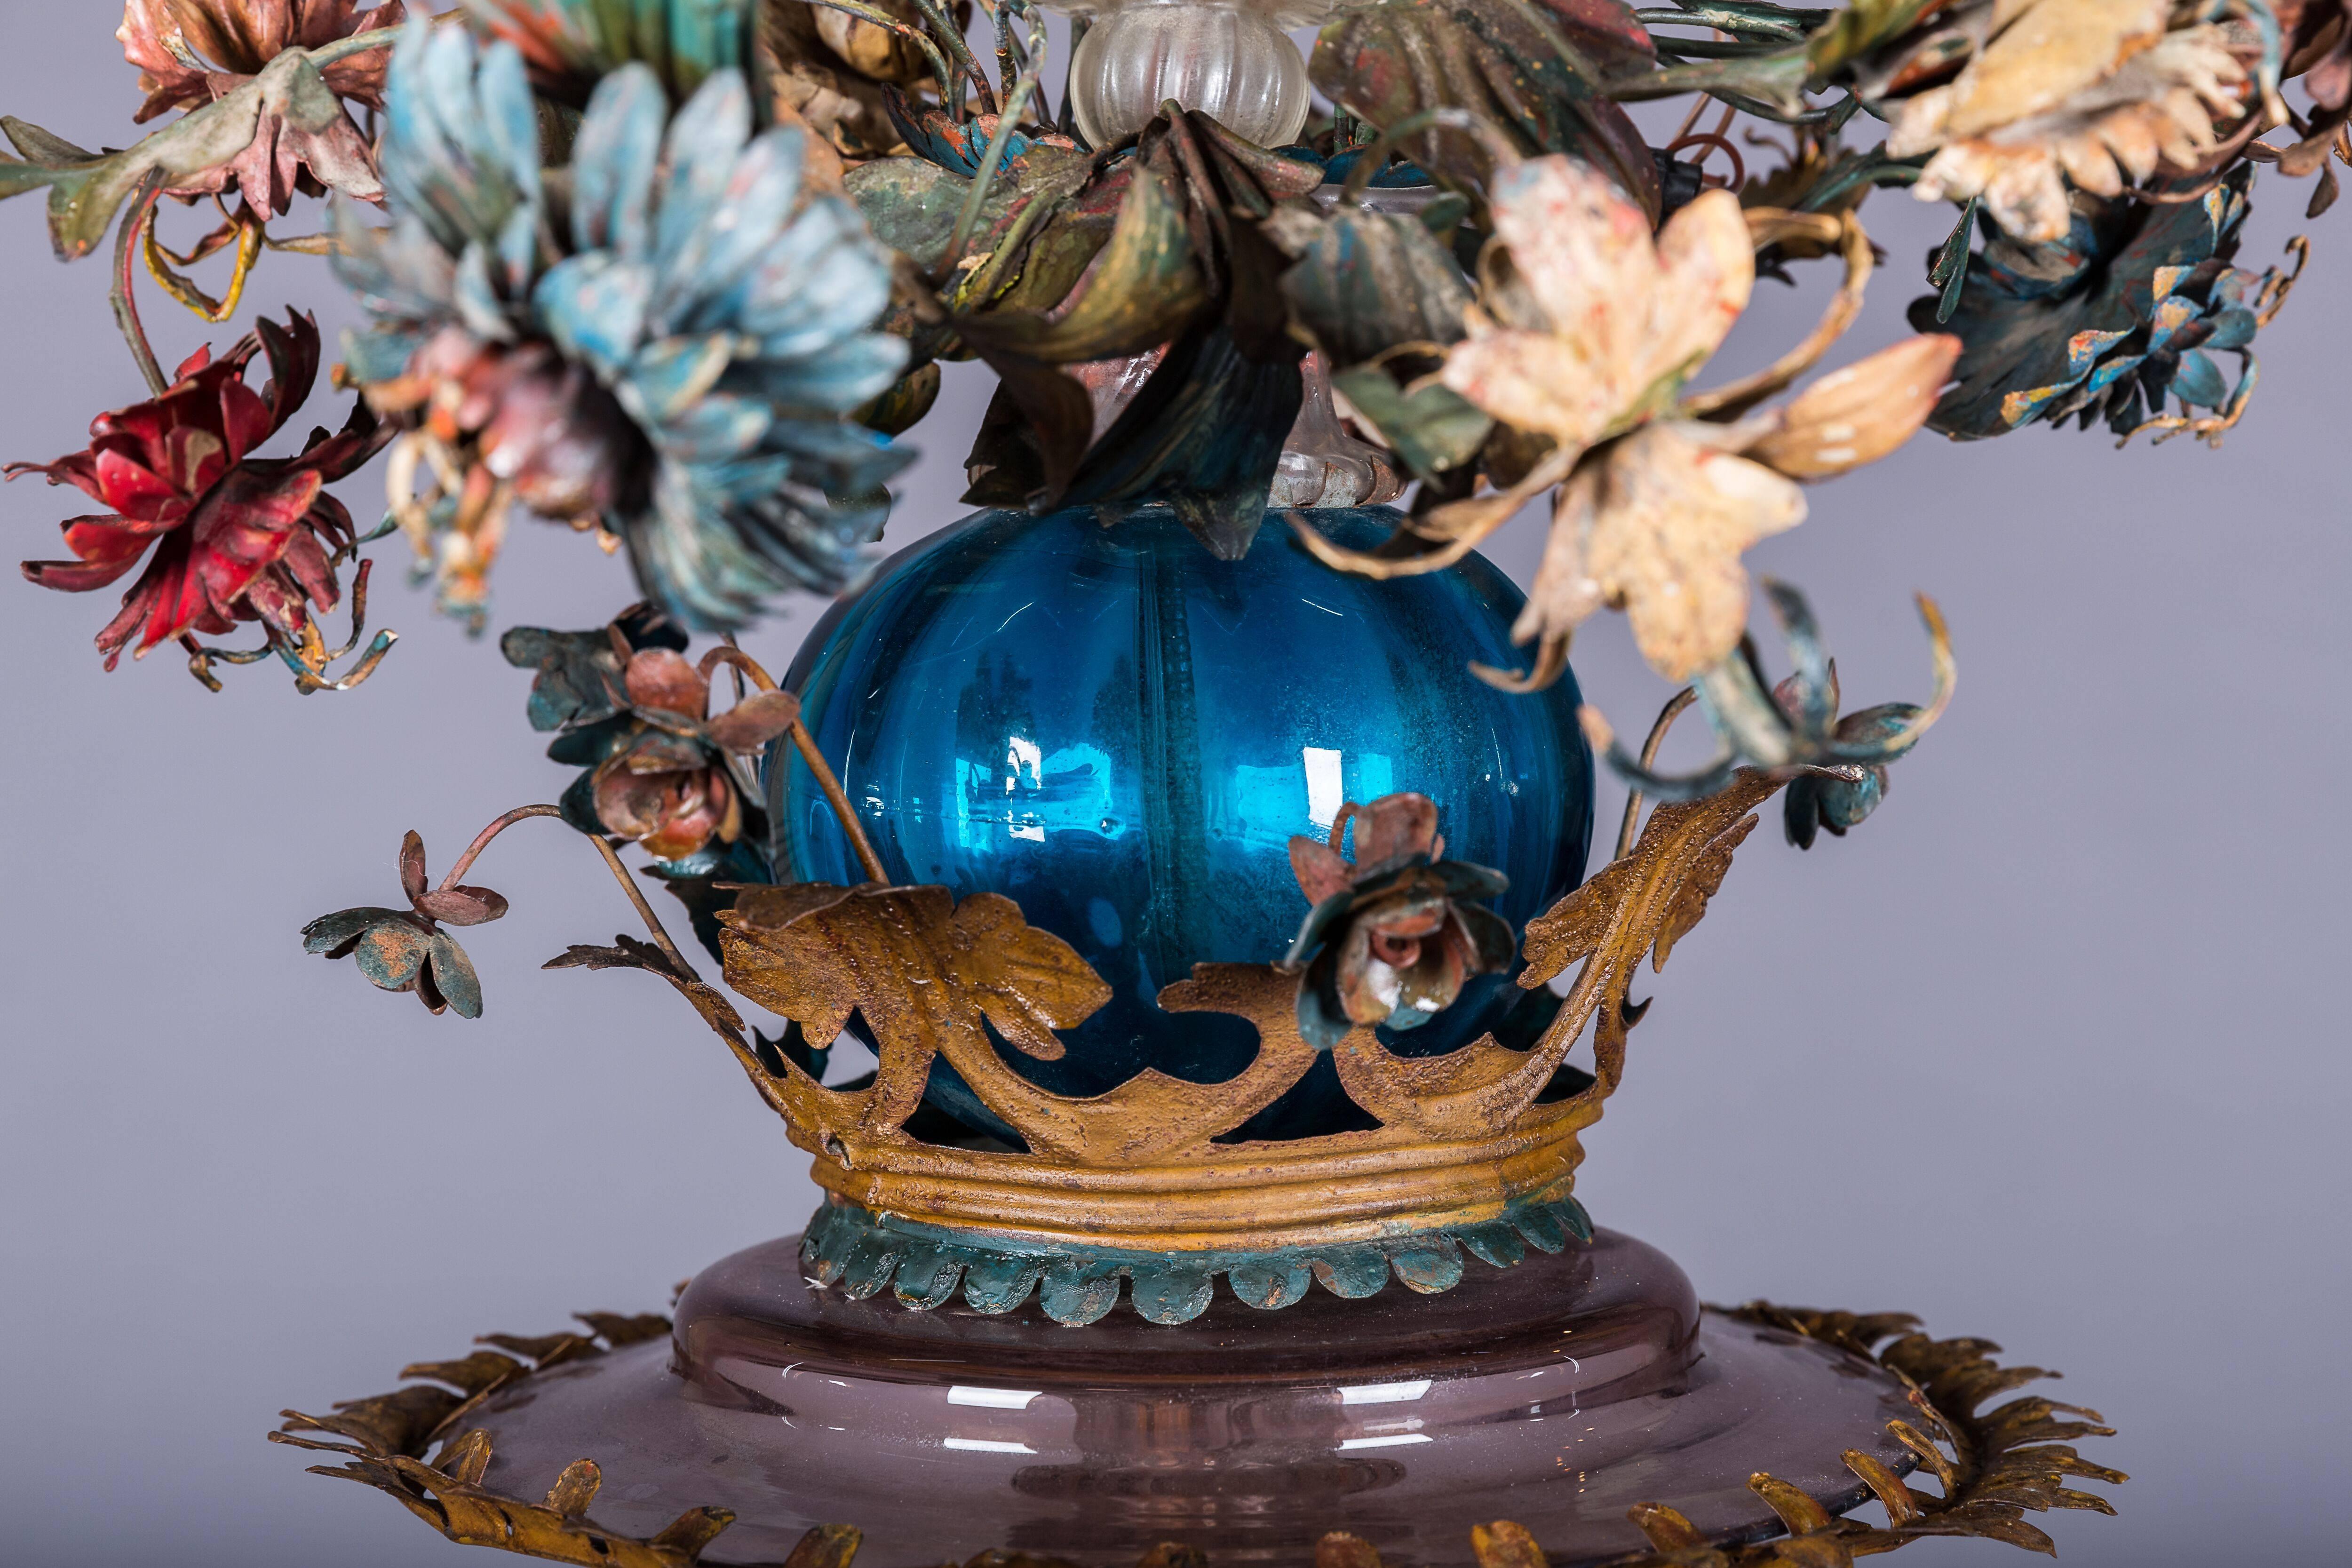 Lantern with eighteen lights made of cut and pushed away iron decorated with flowers and leafs.
Work from the 18th century, probably from Piedmont.
Historically, Turkey seems to be the birthplace of painted sheet metal with objects like tea pot or